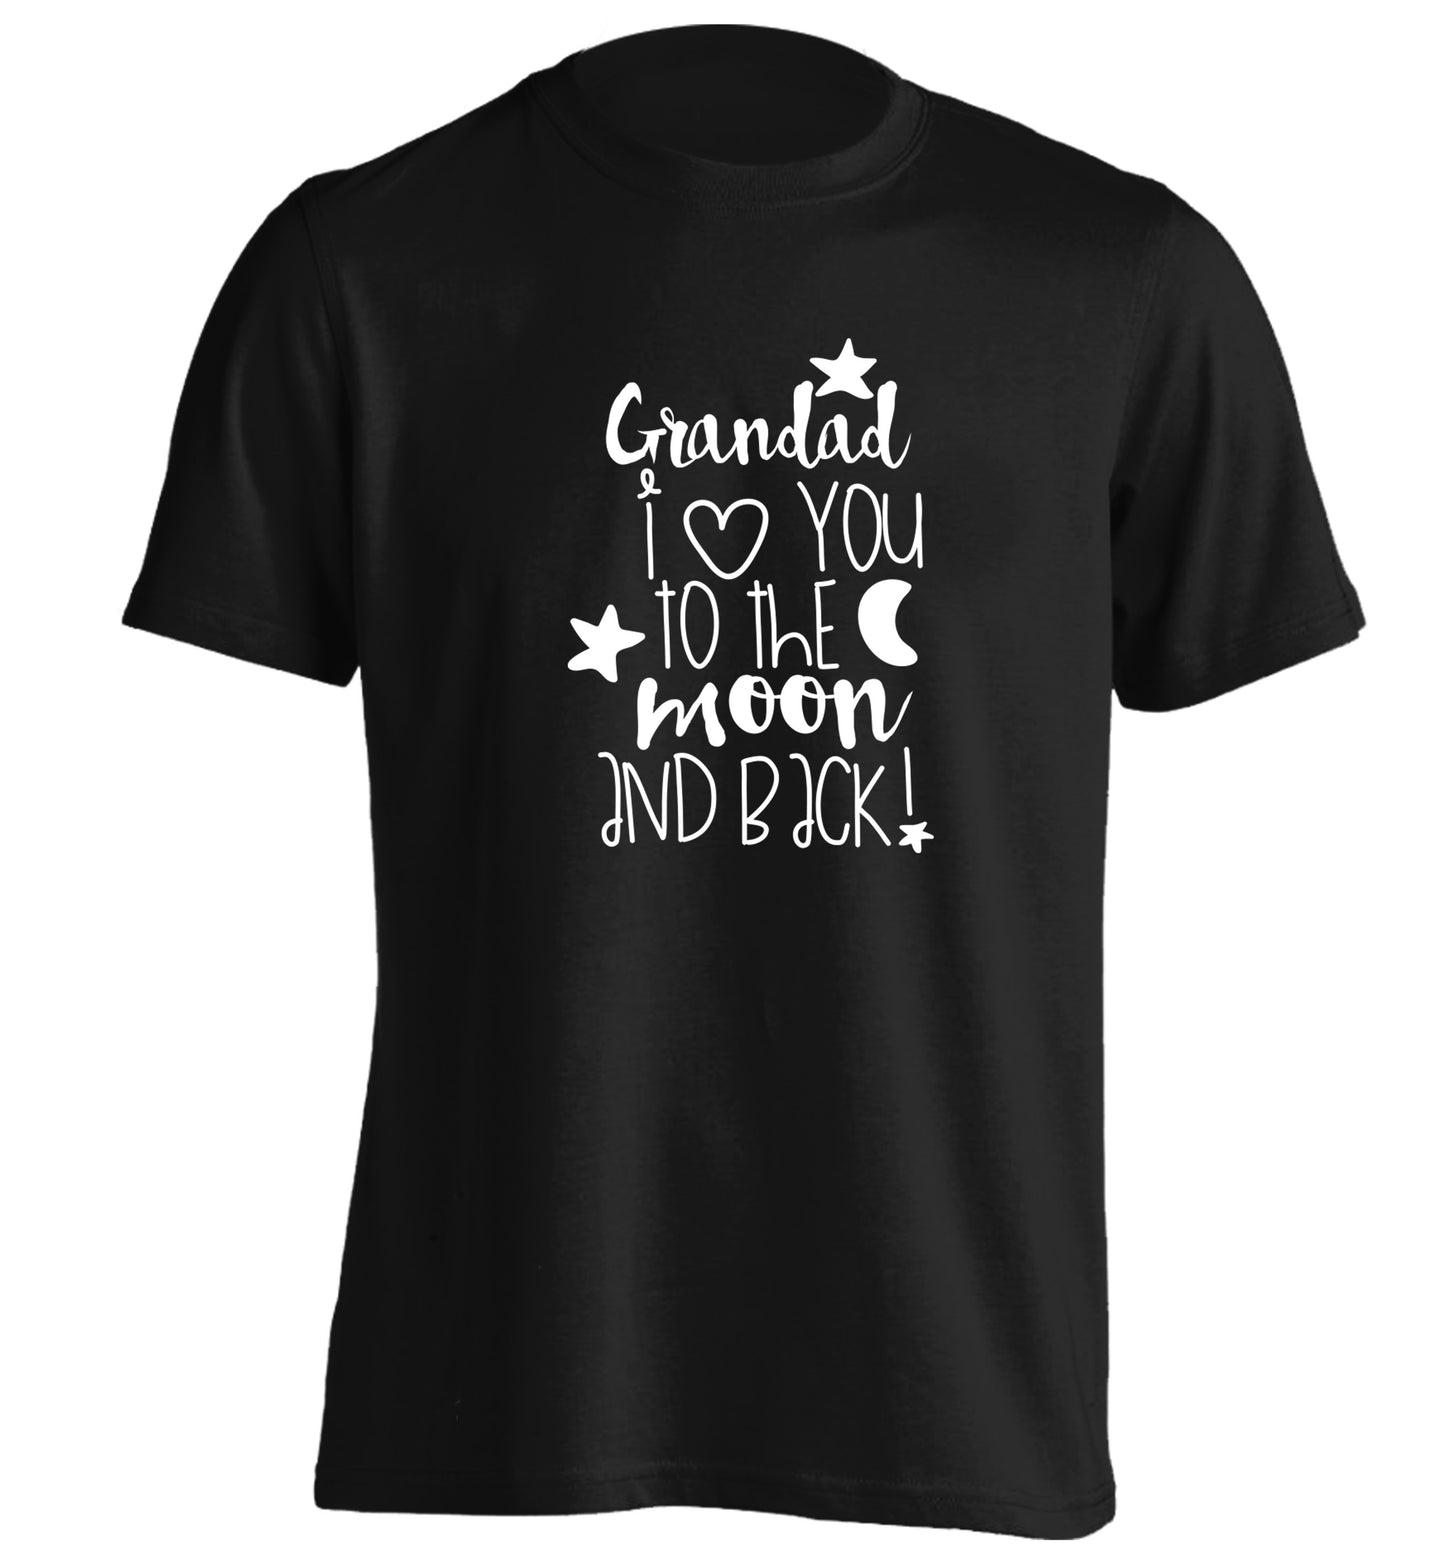 Grandad's I love you to the moon and back adults unisex black Tshirt 2XL